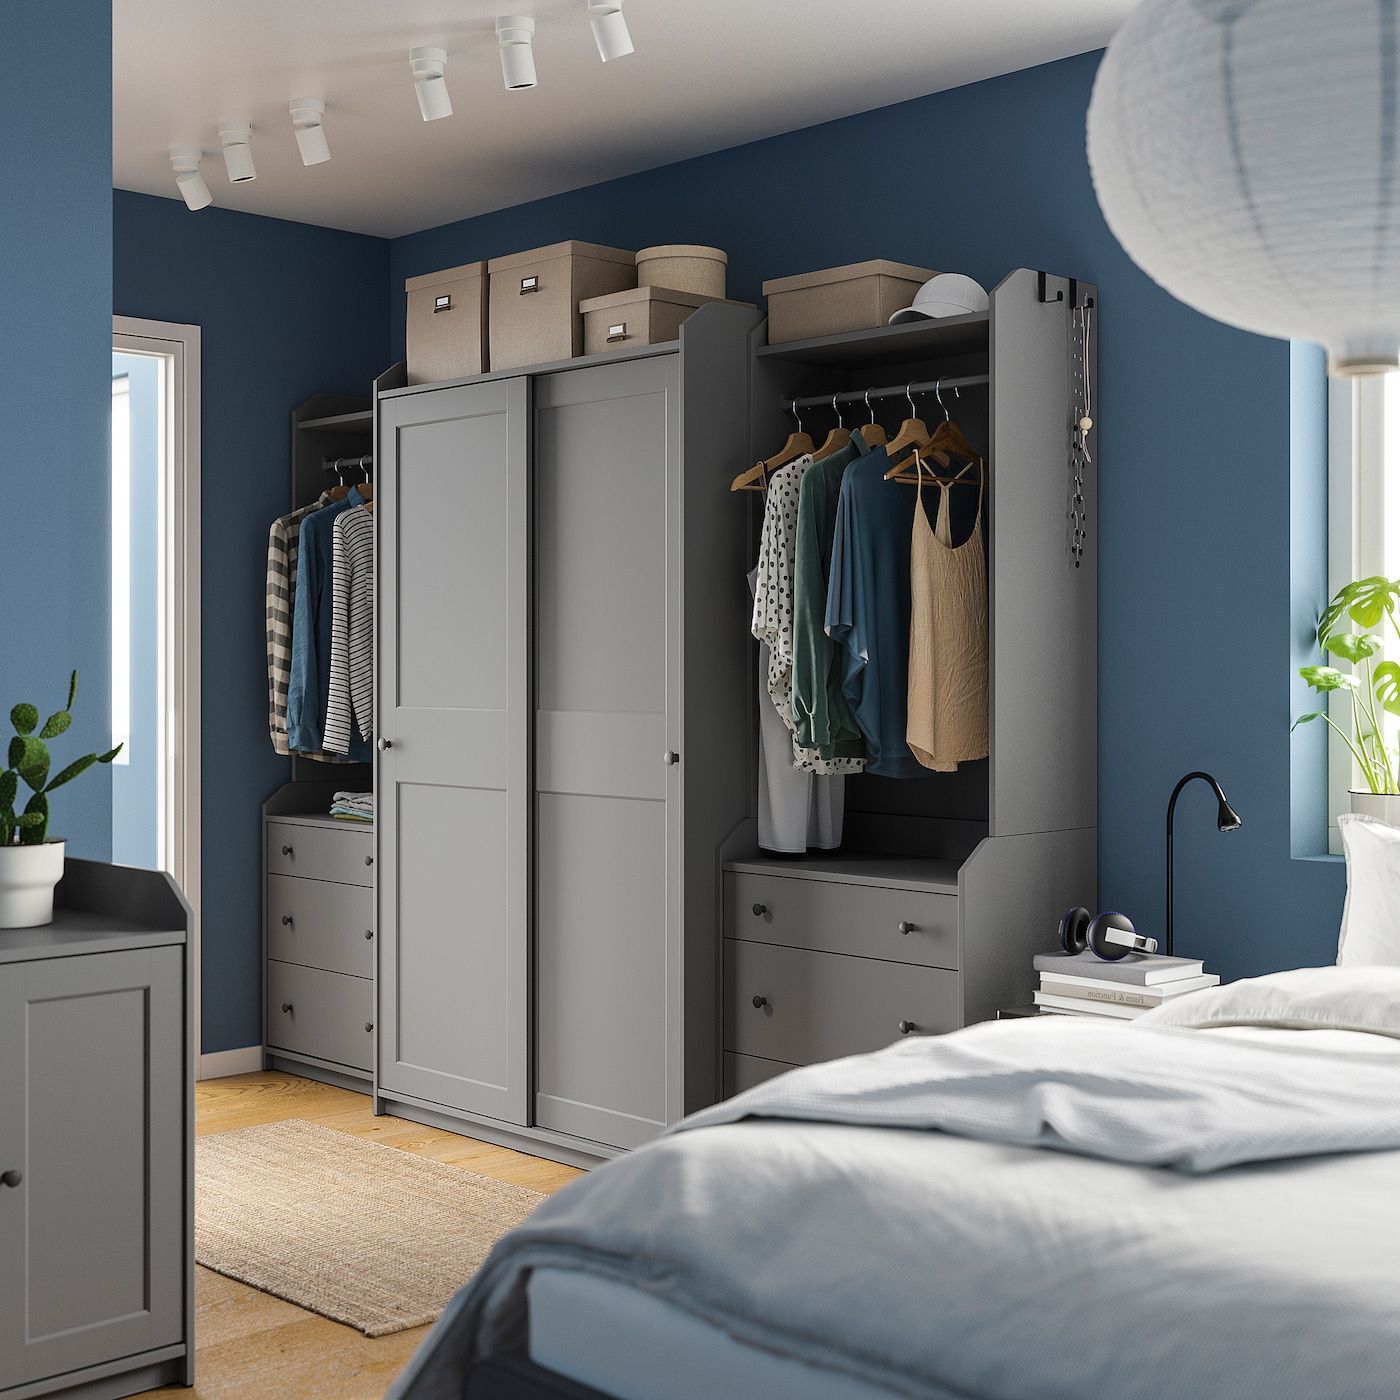 Hauga Wardrobe Combination, Gray, 1015/8x215/8x783/8" – Ikea With Regard To Wardrobes And Drawers Combo (View 5 of 20)